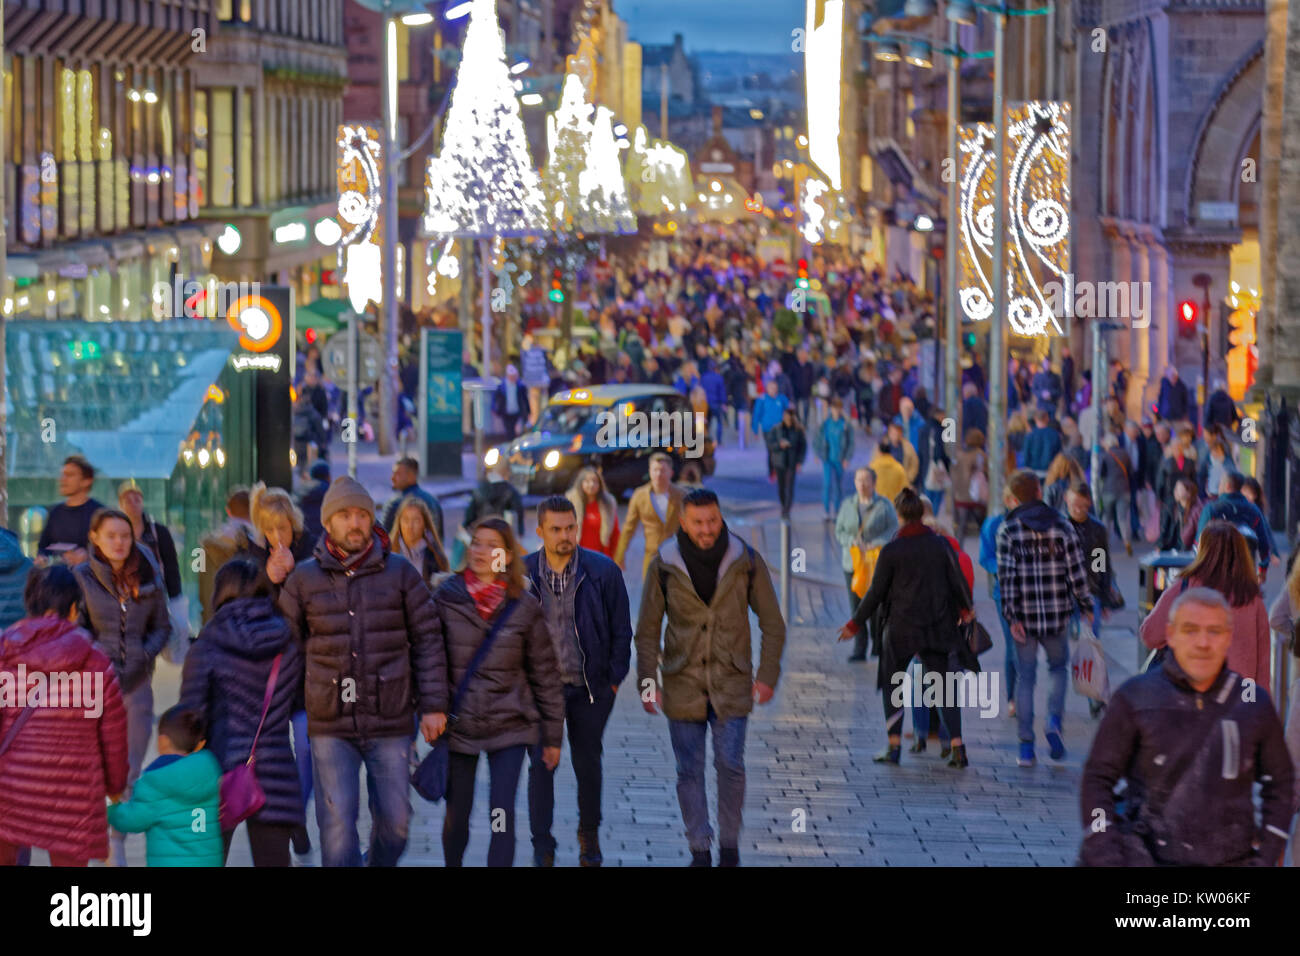 Christmas decorations on Buchanan street the style mile with crowds of shoppers shopping Stock Photo